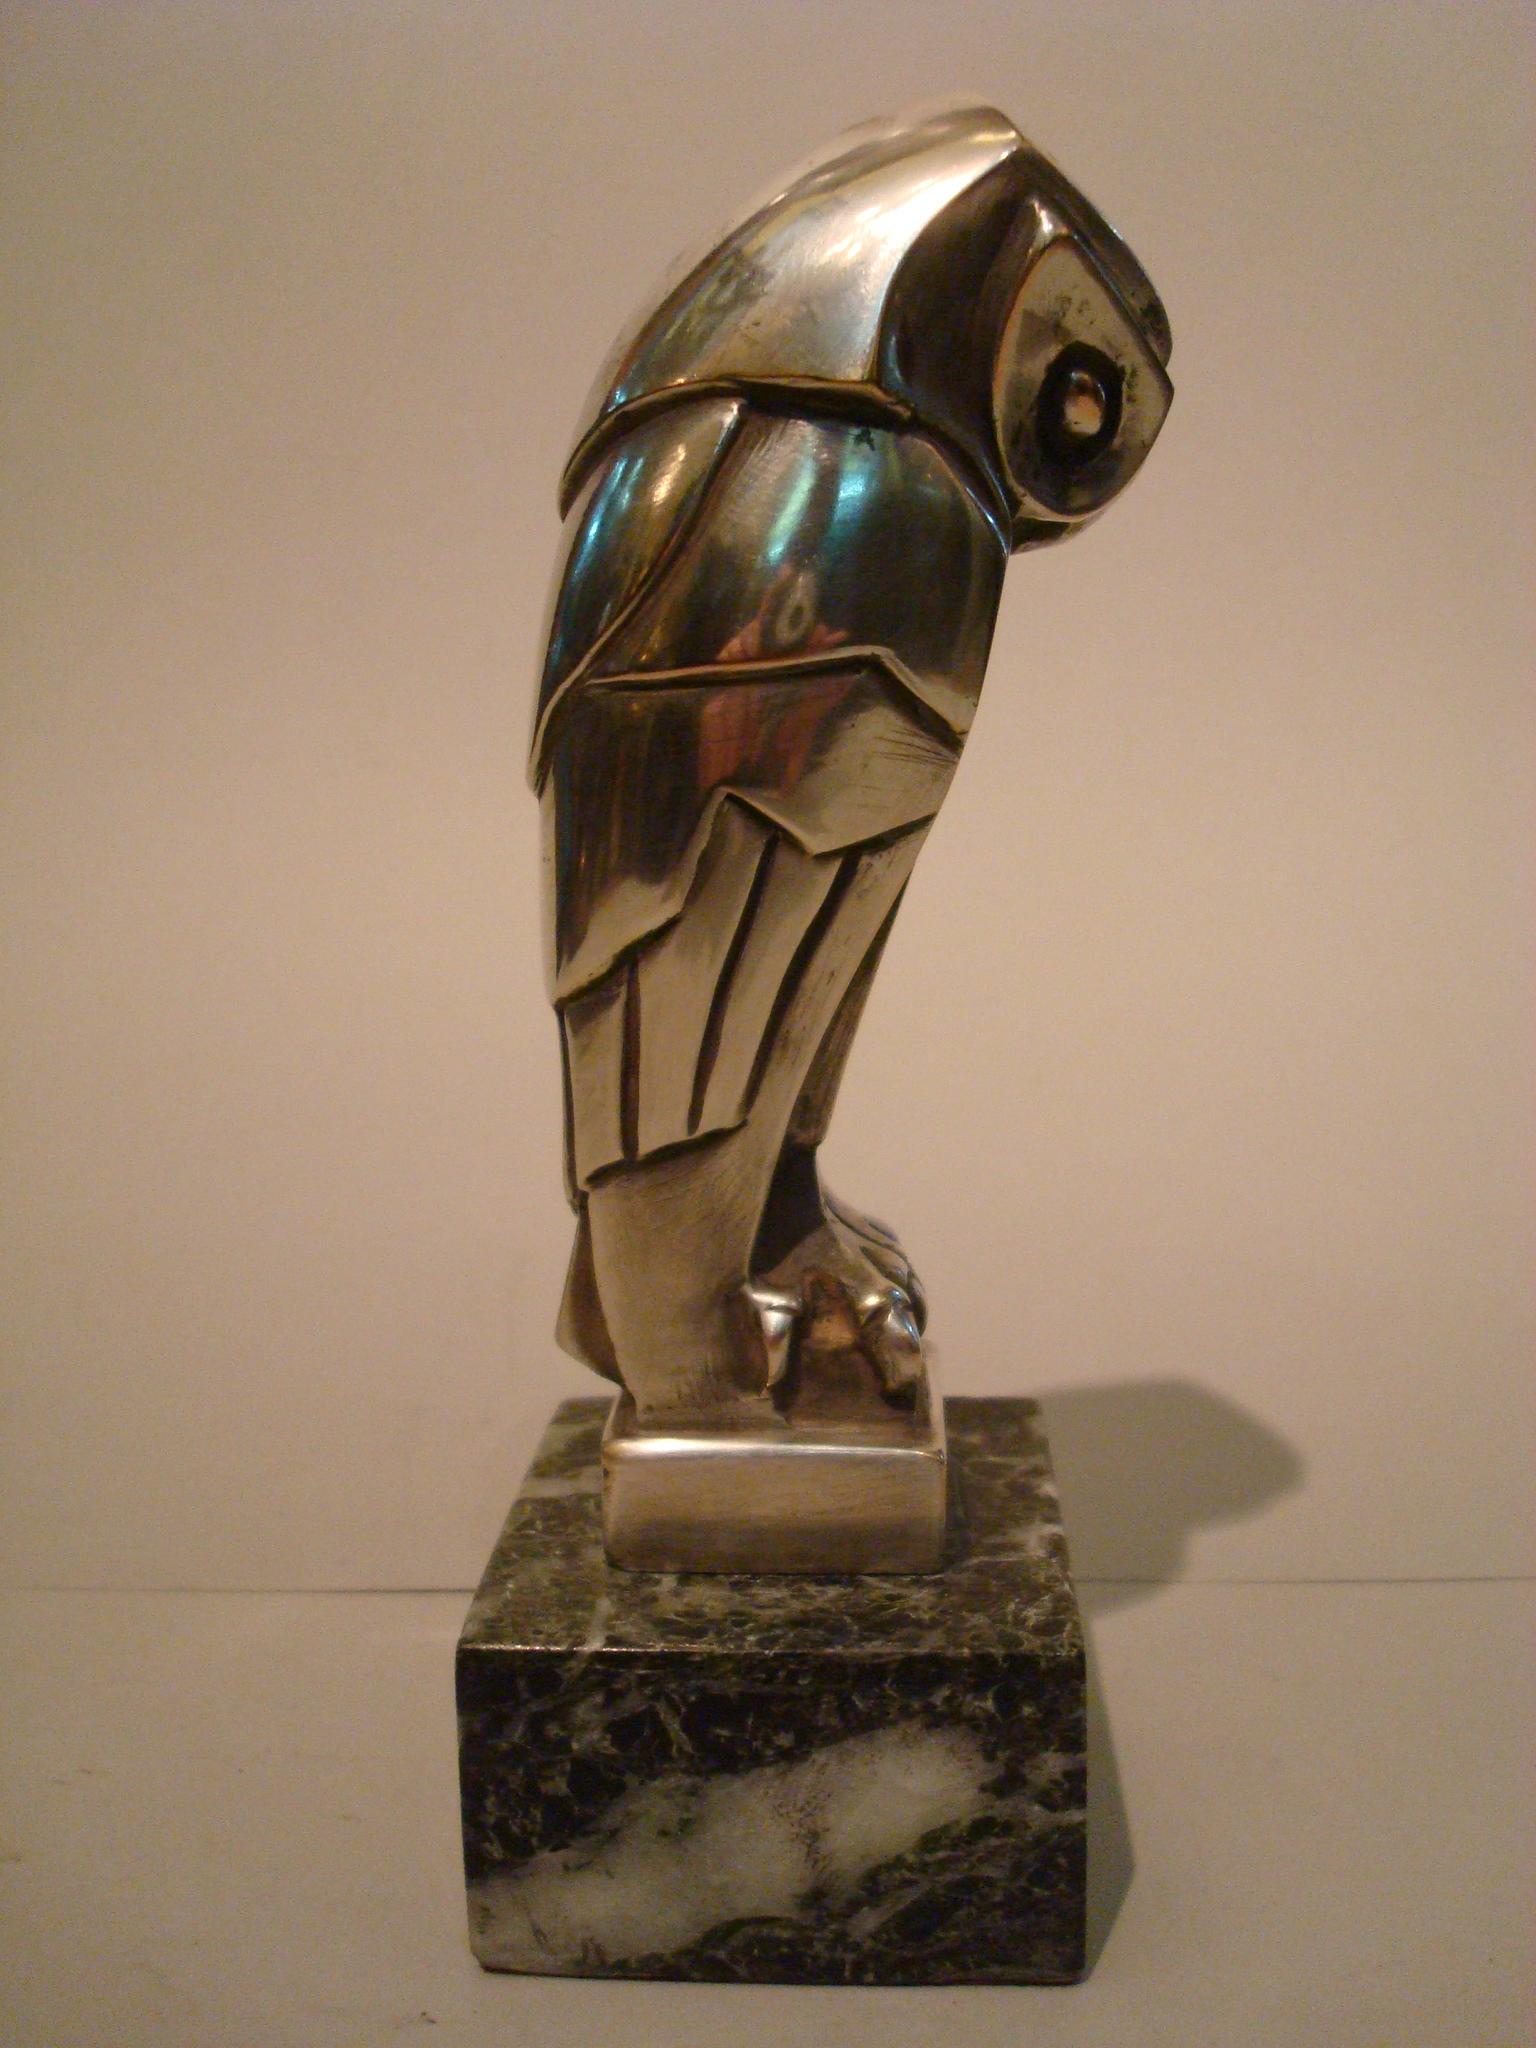 Art Deco, Cubist Edouard-Marcel Sandoz Owl - Hibou Bronze Car Mascot - Mascotte Automobile - Automobilia
Edouard Marcel Sandoz (1881-1971) Owl - Hibou silver plated bronze car mascot, hood ornament. Also used as paperweight. Mounted over a marble